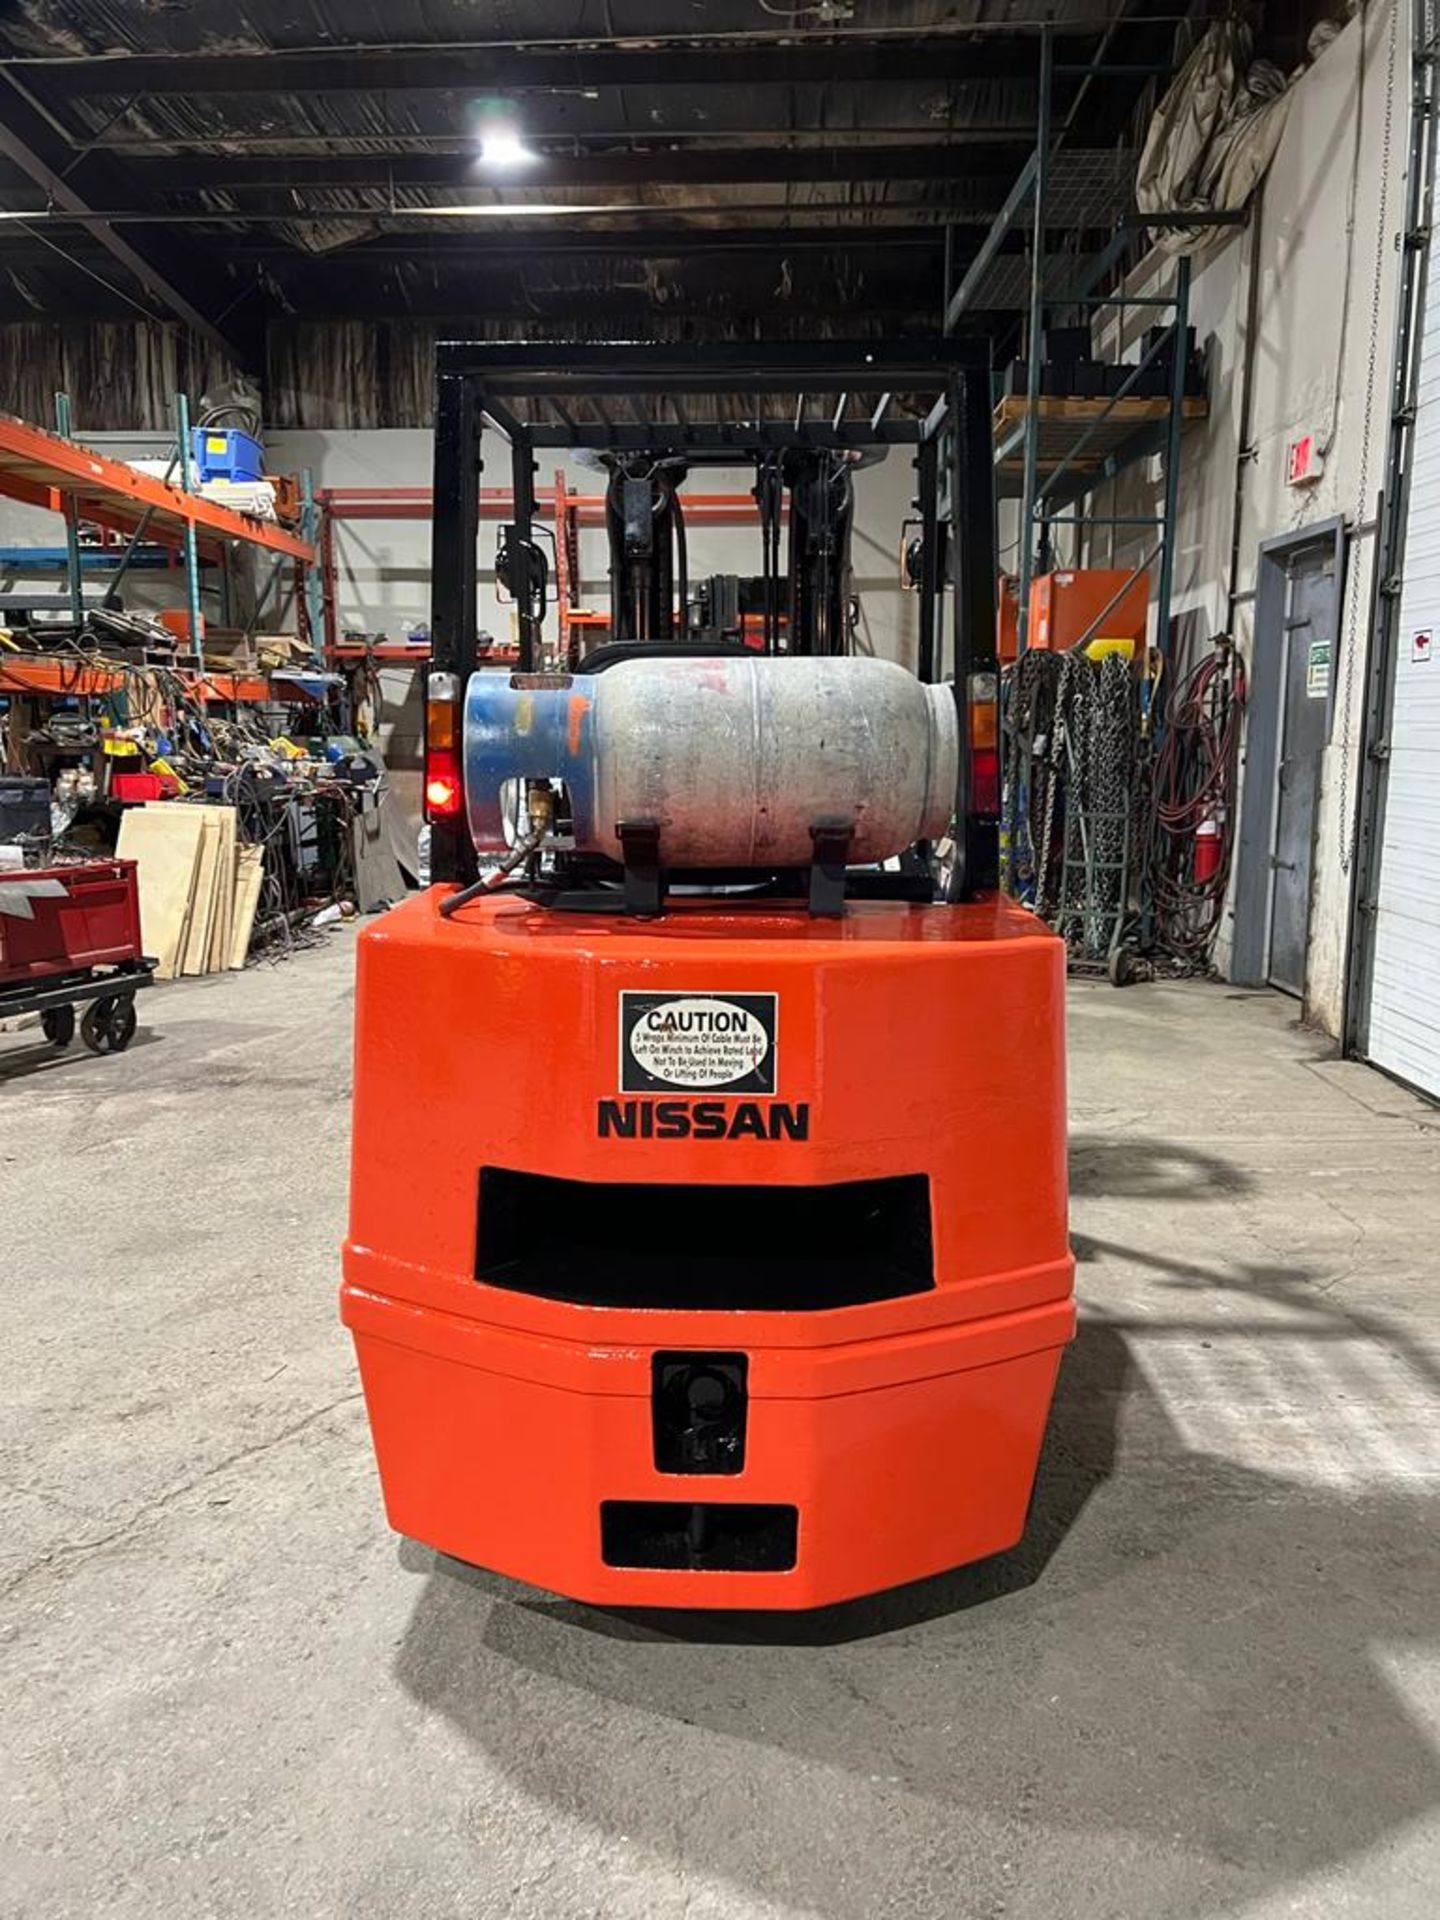 NICE Nissan 7,150lbs Capacity Forklift LPG (propane) with Sideshift 3-stage mast and LOW HOURS - Image 3 of 5